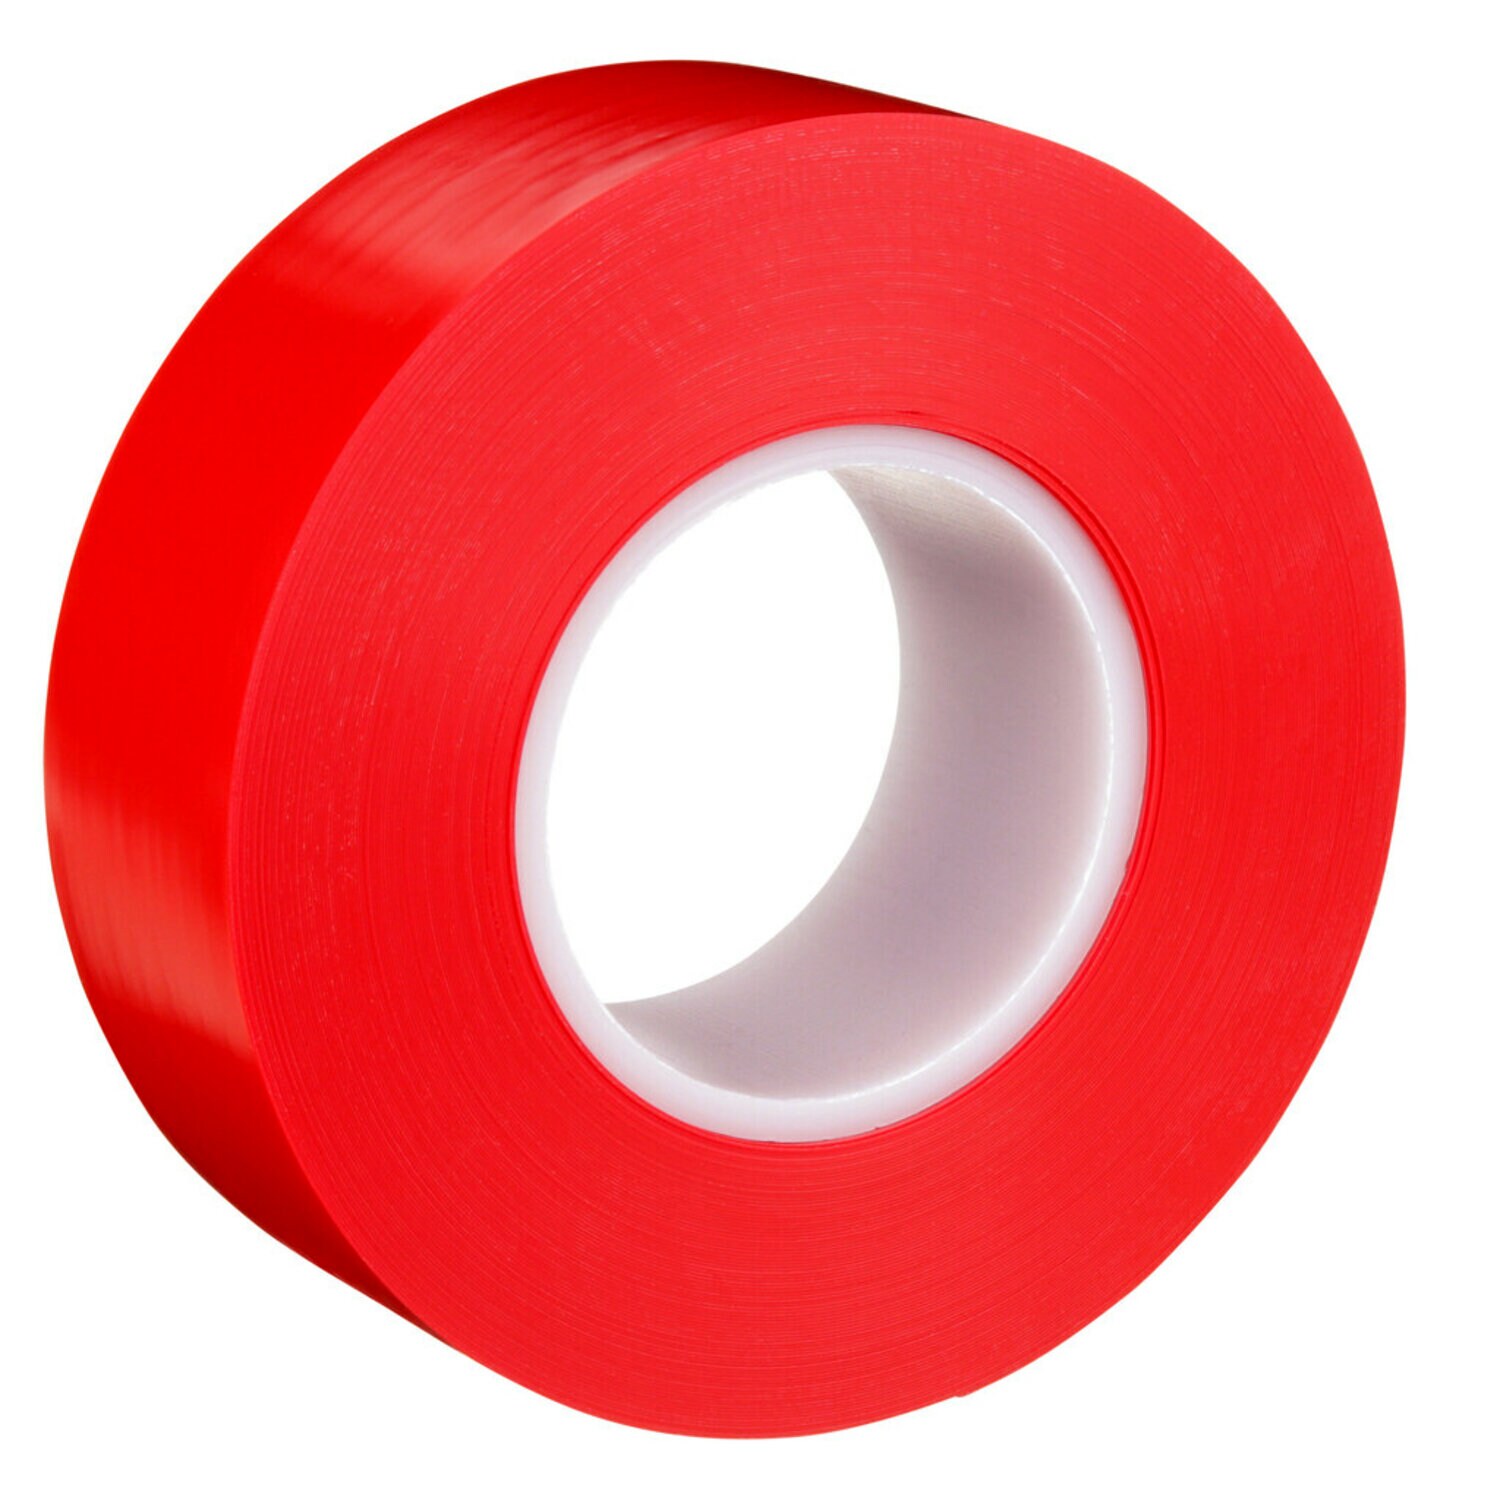 7100259699 - 3M Durable Floor Marking Tape 971, Red, 2 in x 36 yd, 17 mil, 6 Rolls/Case, Individually Wrapped Conveniently Packaged